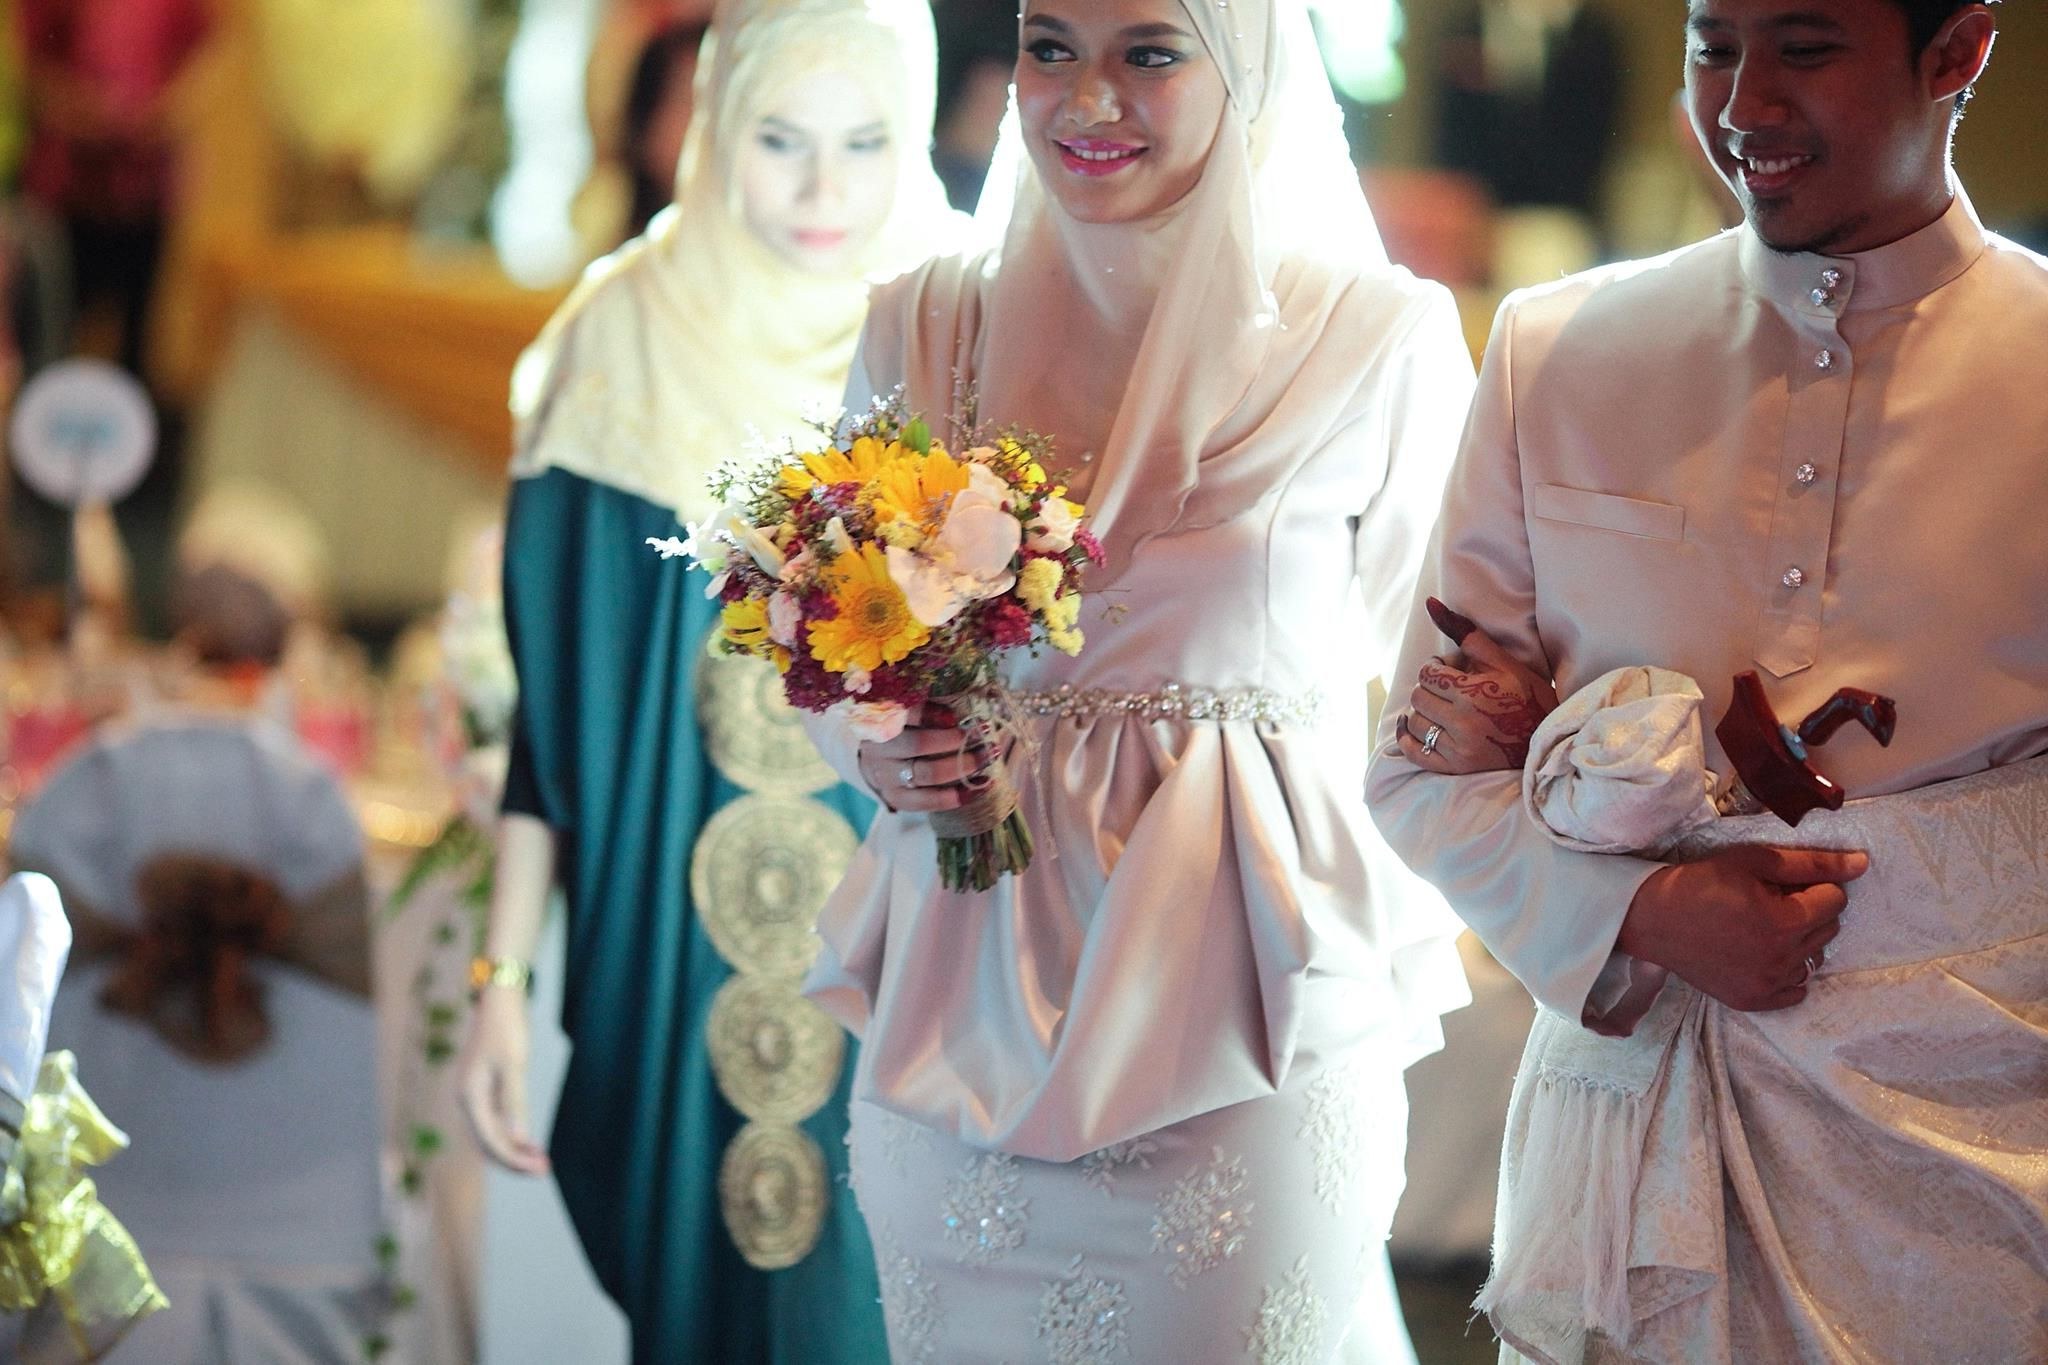 Ide Hijab Bridesmaid Ftd8 Malay Wedding the Reception Beige for the Newlyweds and